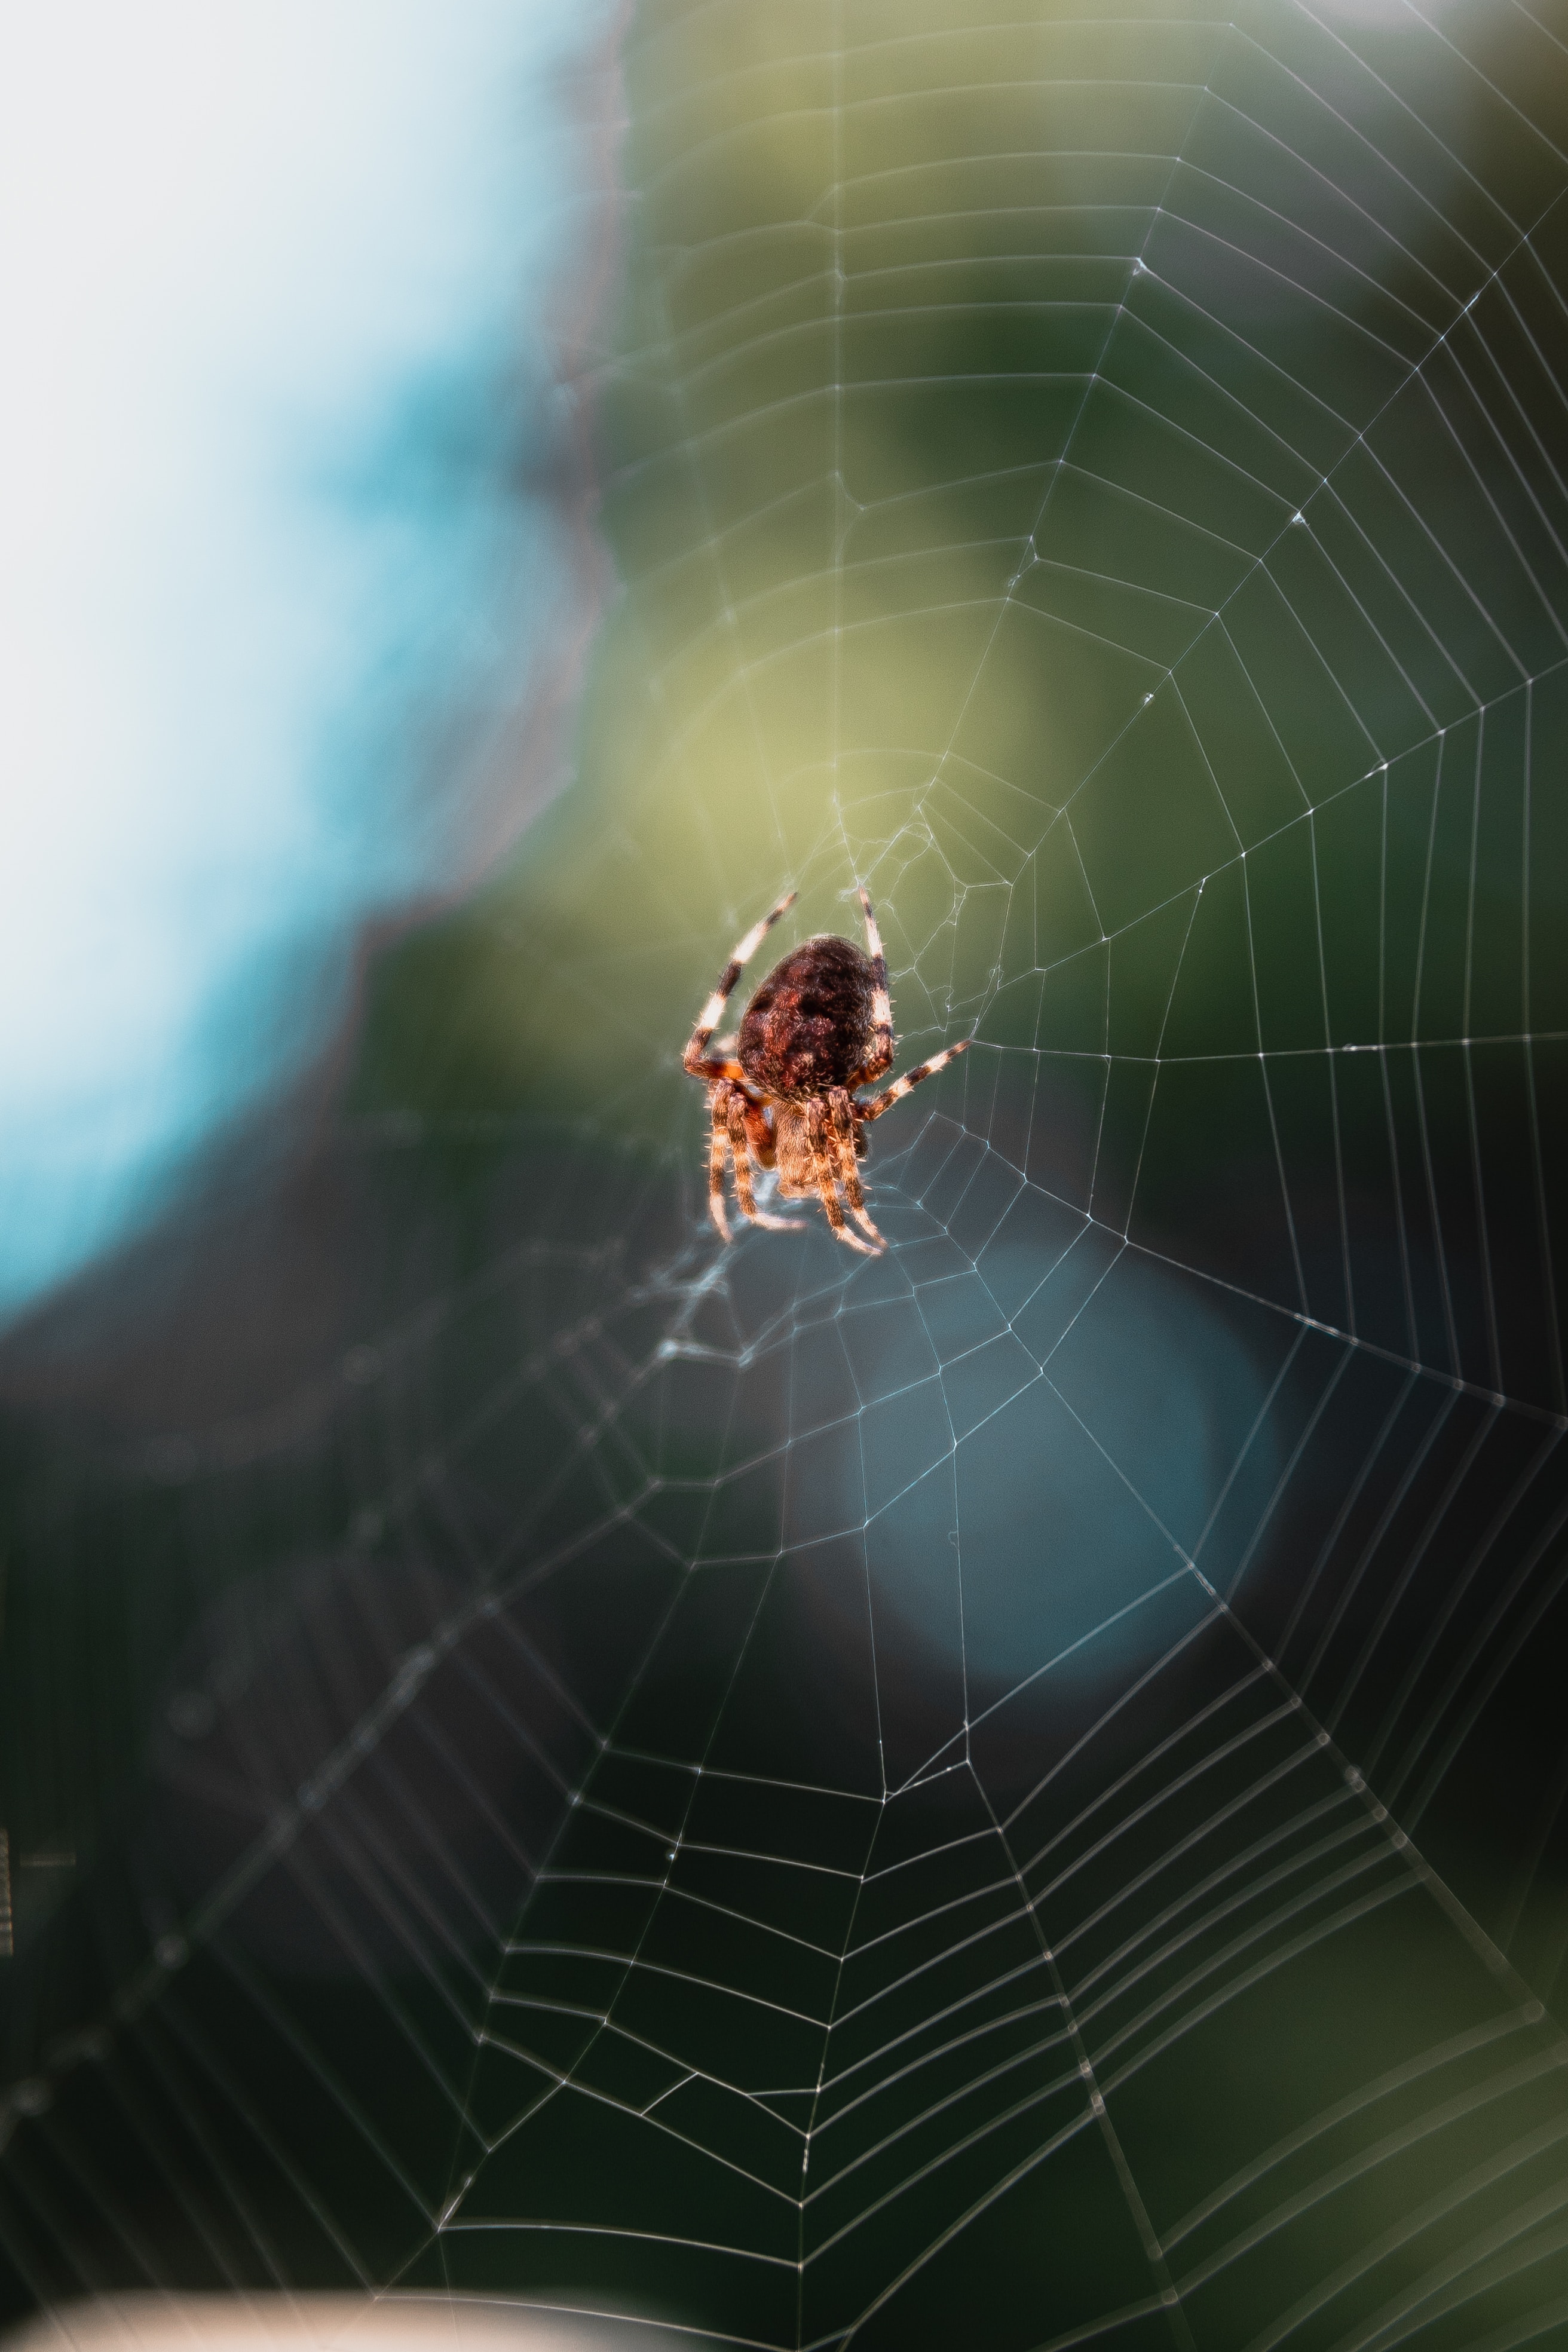 Image of a spider on its web